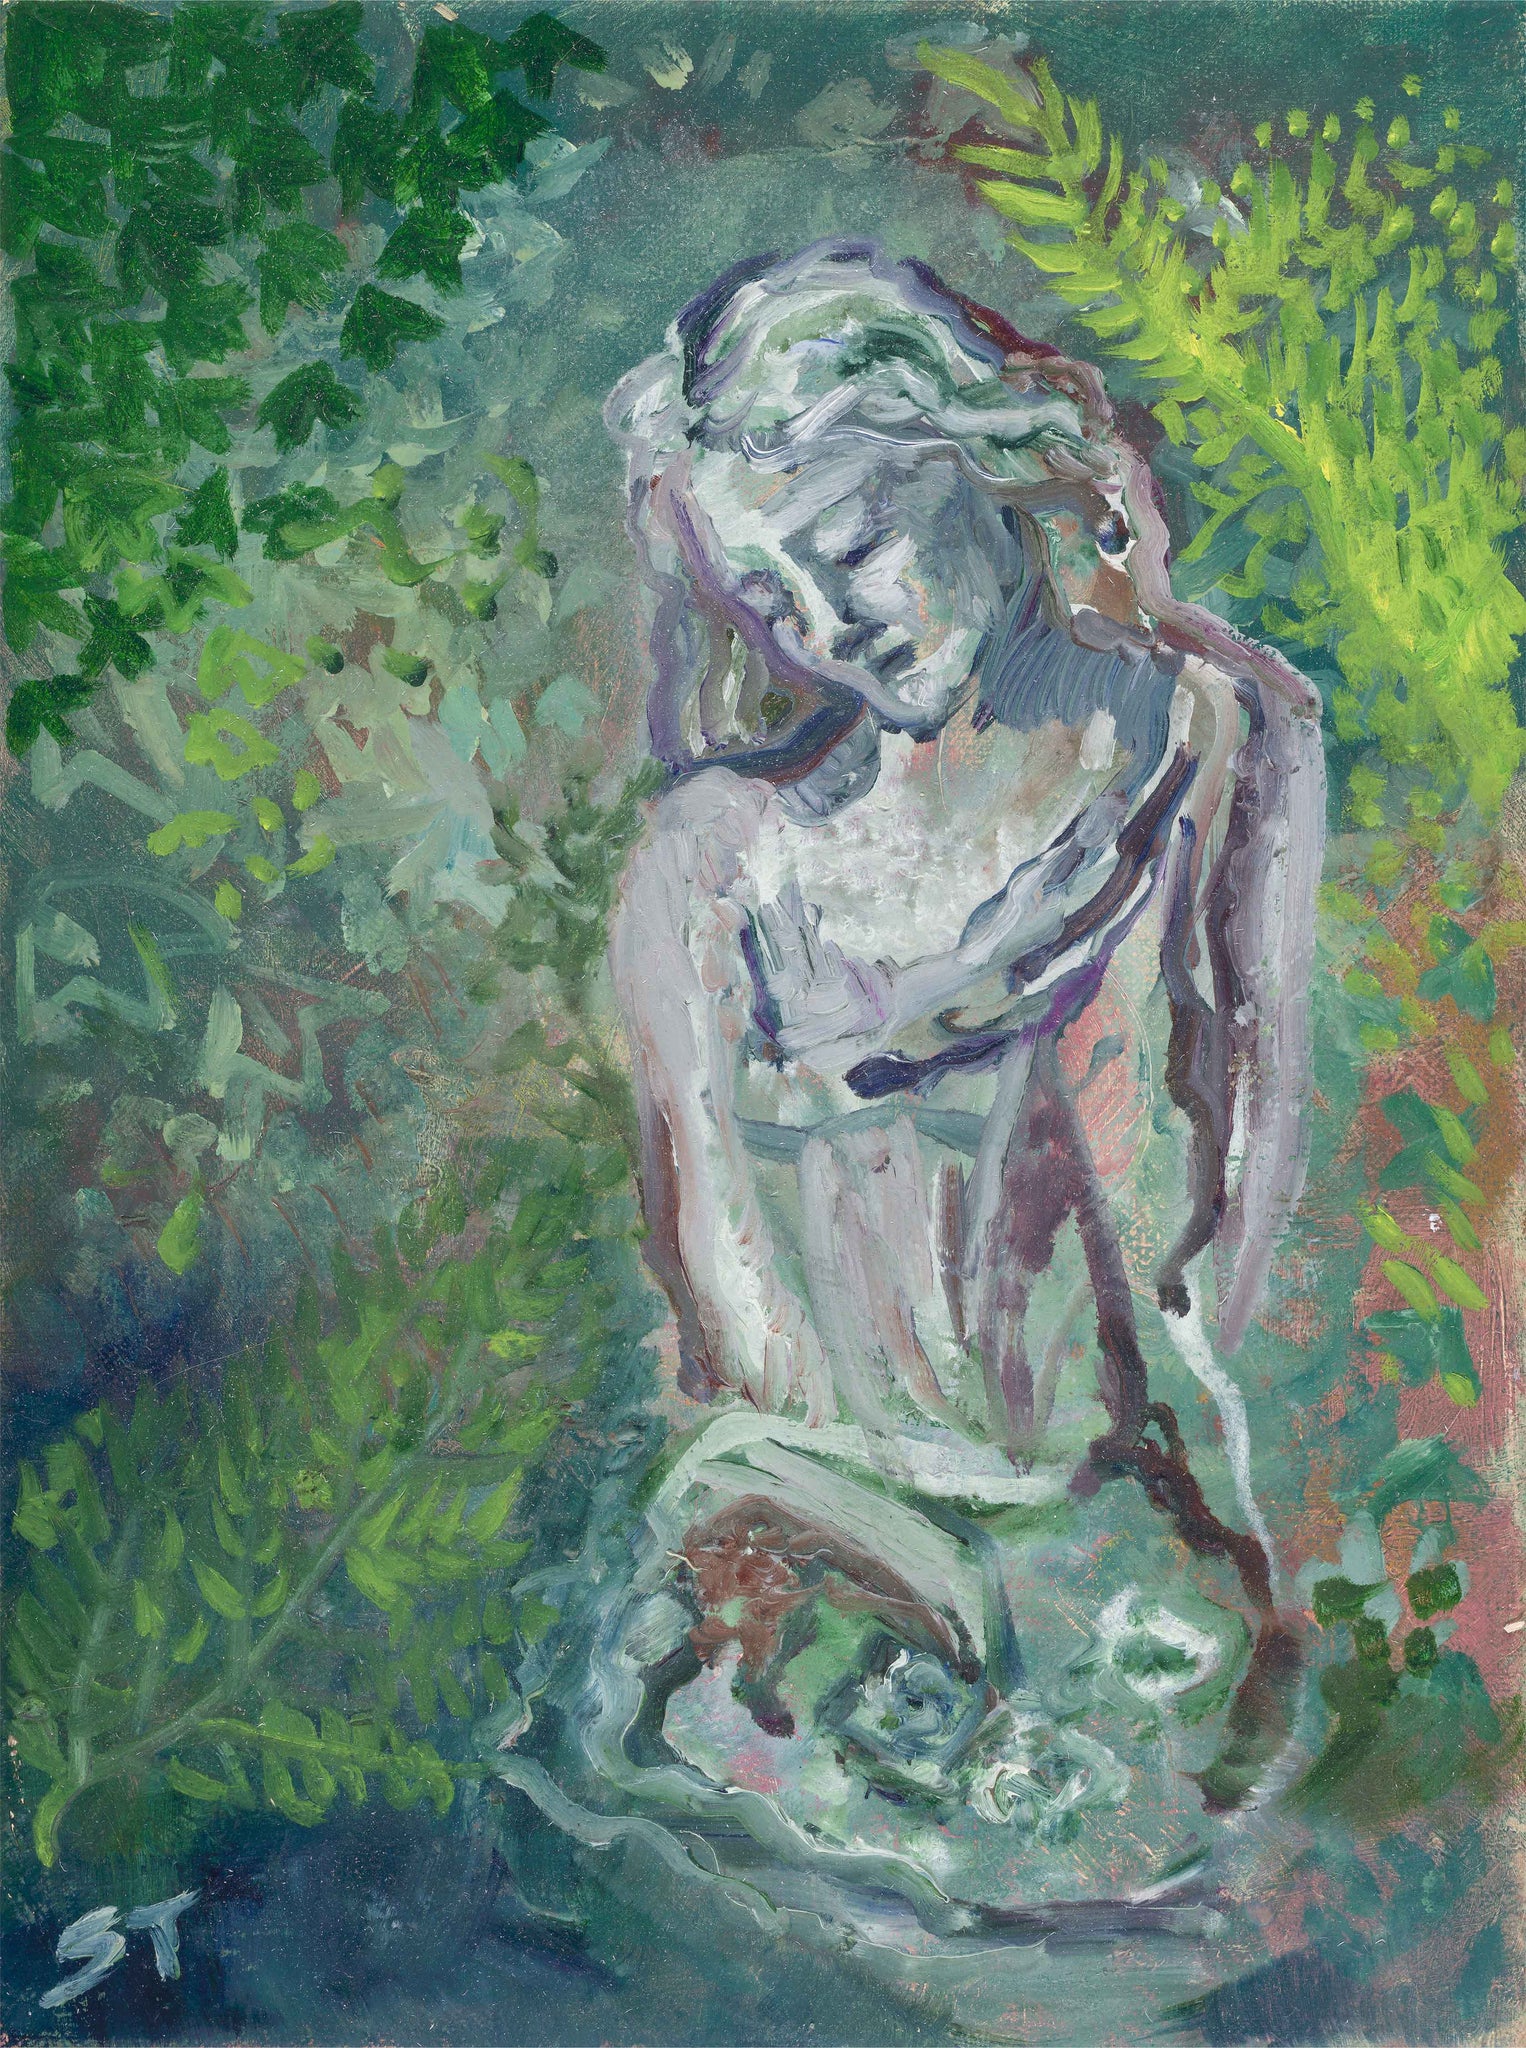 sculpture of lady with ferns